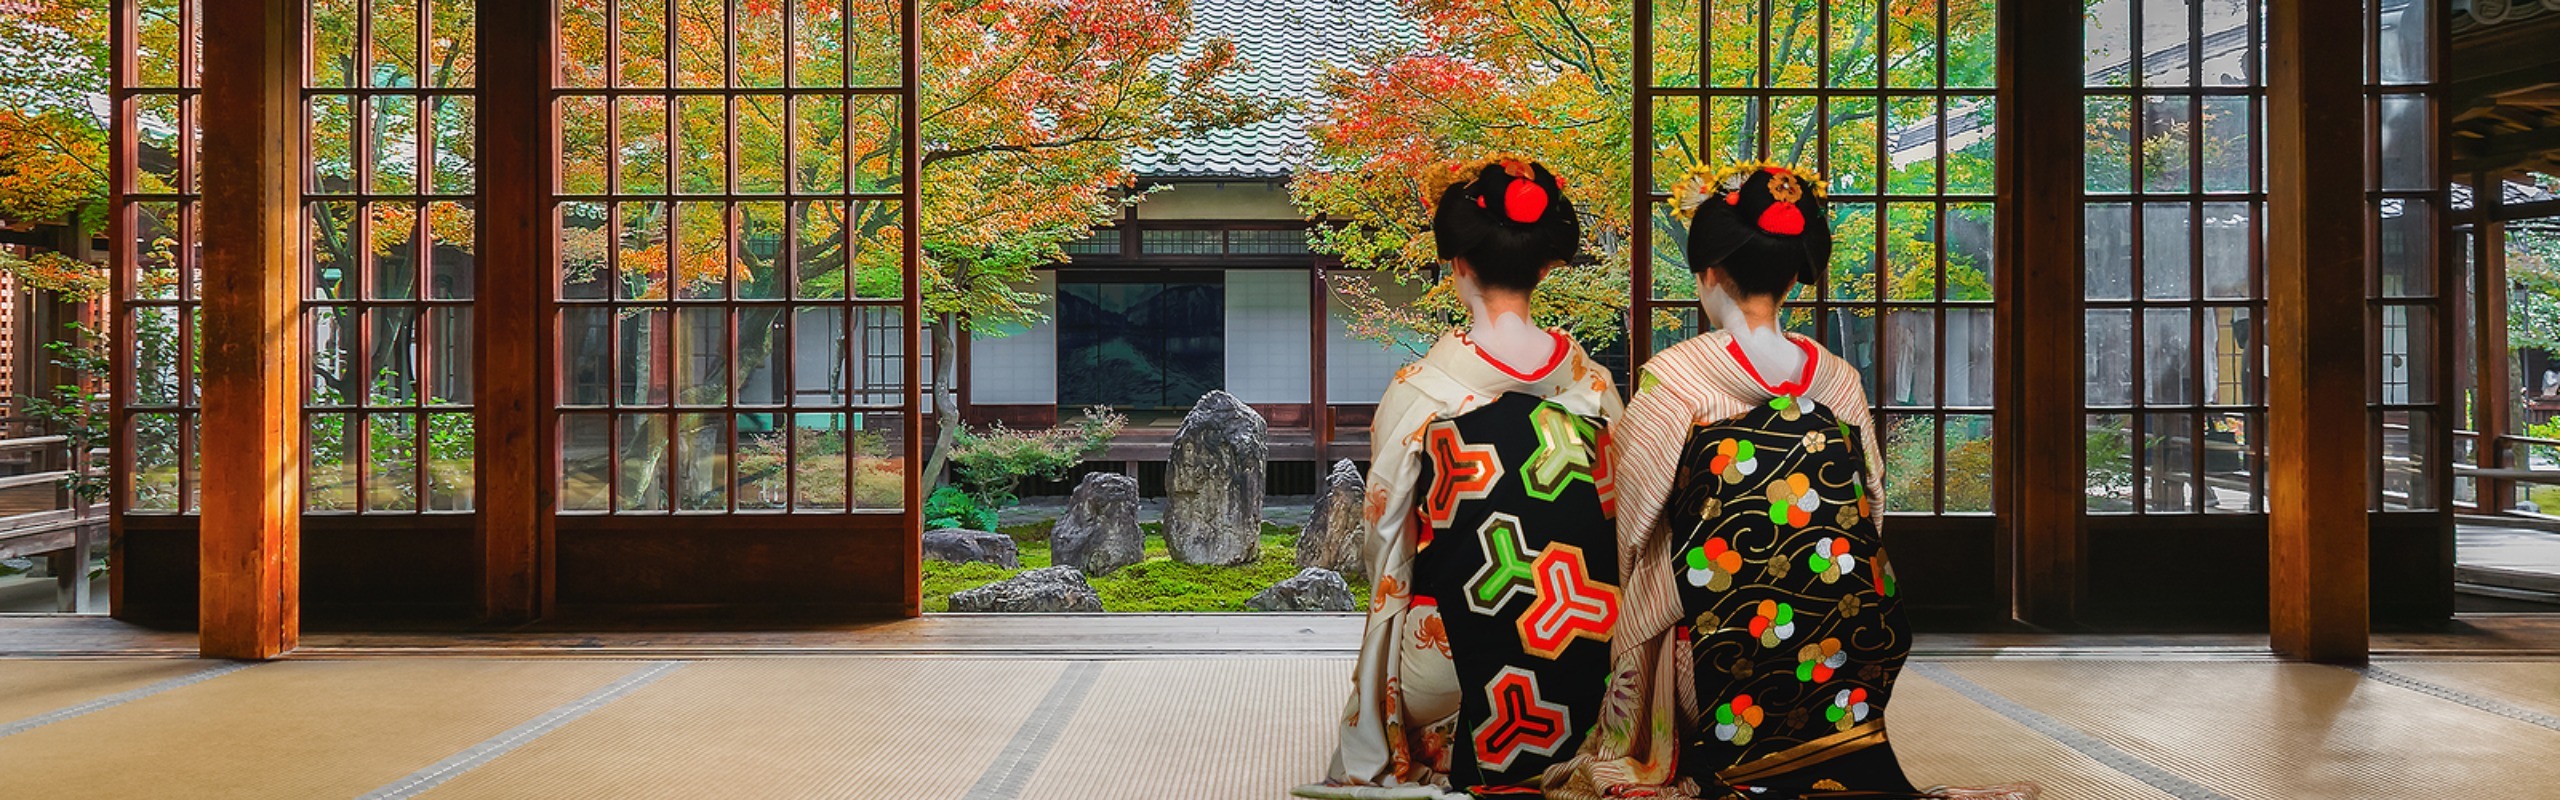 How to Plan a 2-Week Itinerary in Japan and South Korea